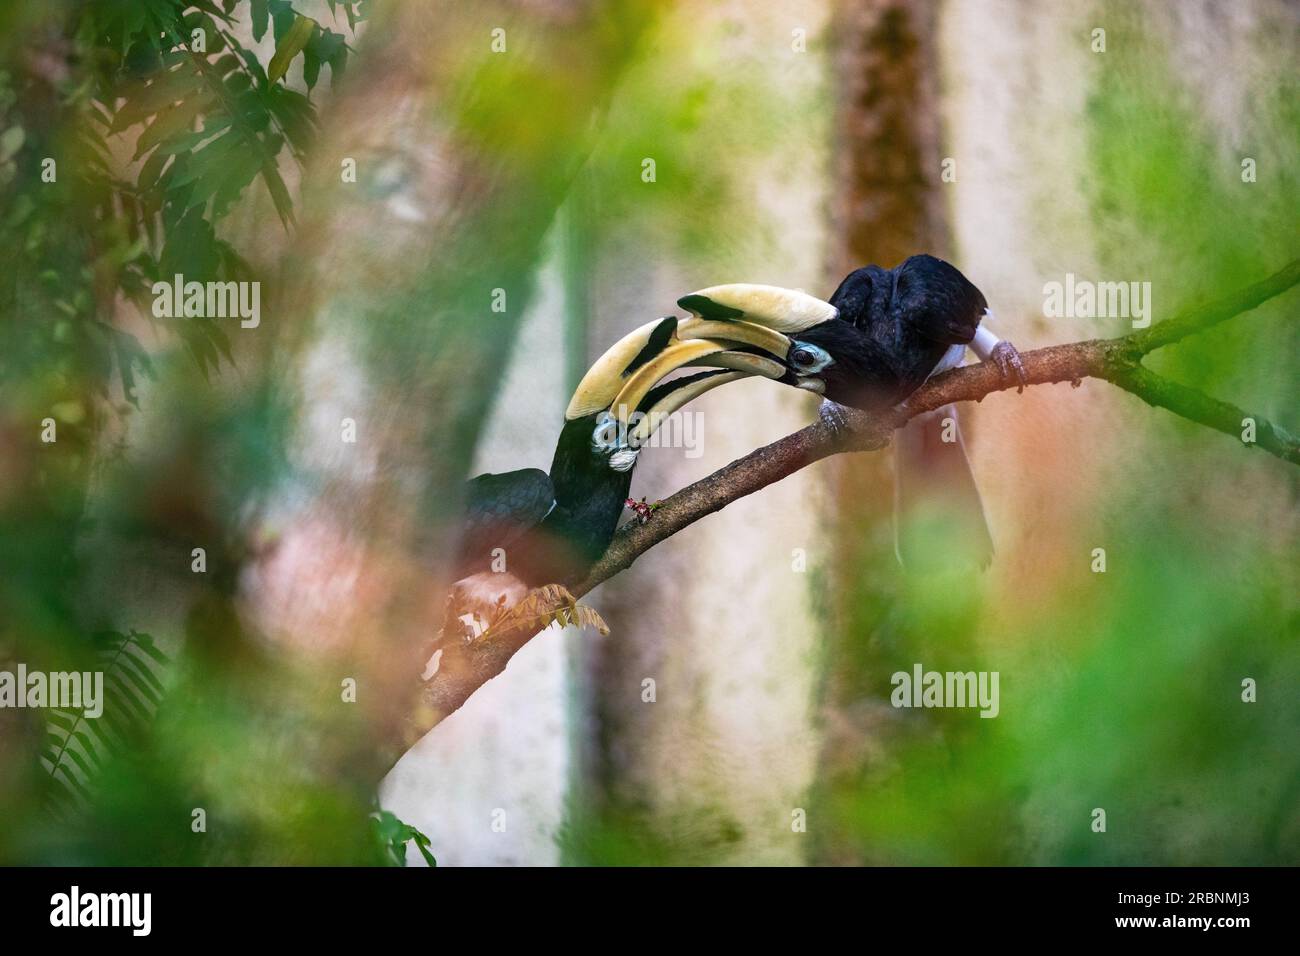 A pair of adult male oriental pied hornbills interact in a similar way to courtship behaviour, Singapore Stock Photo